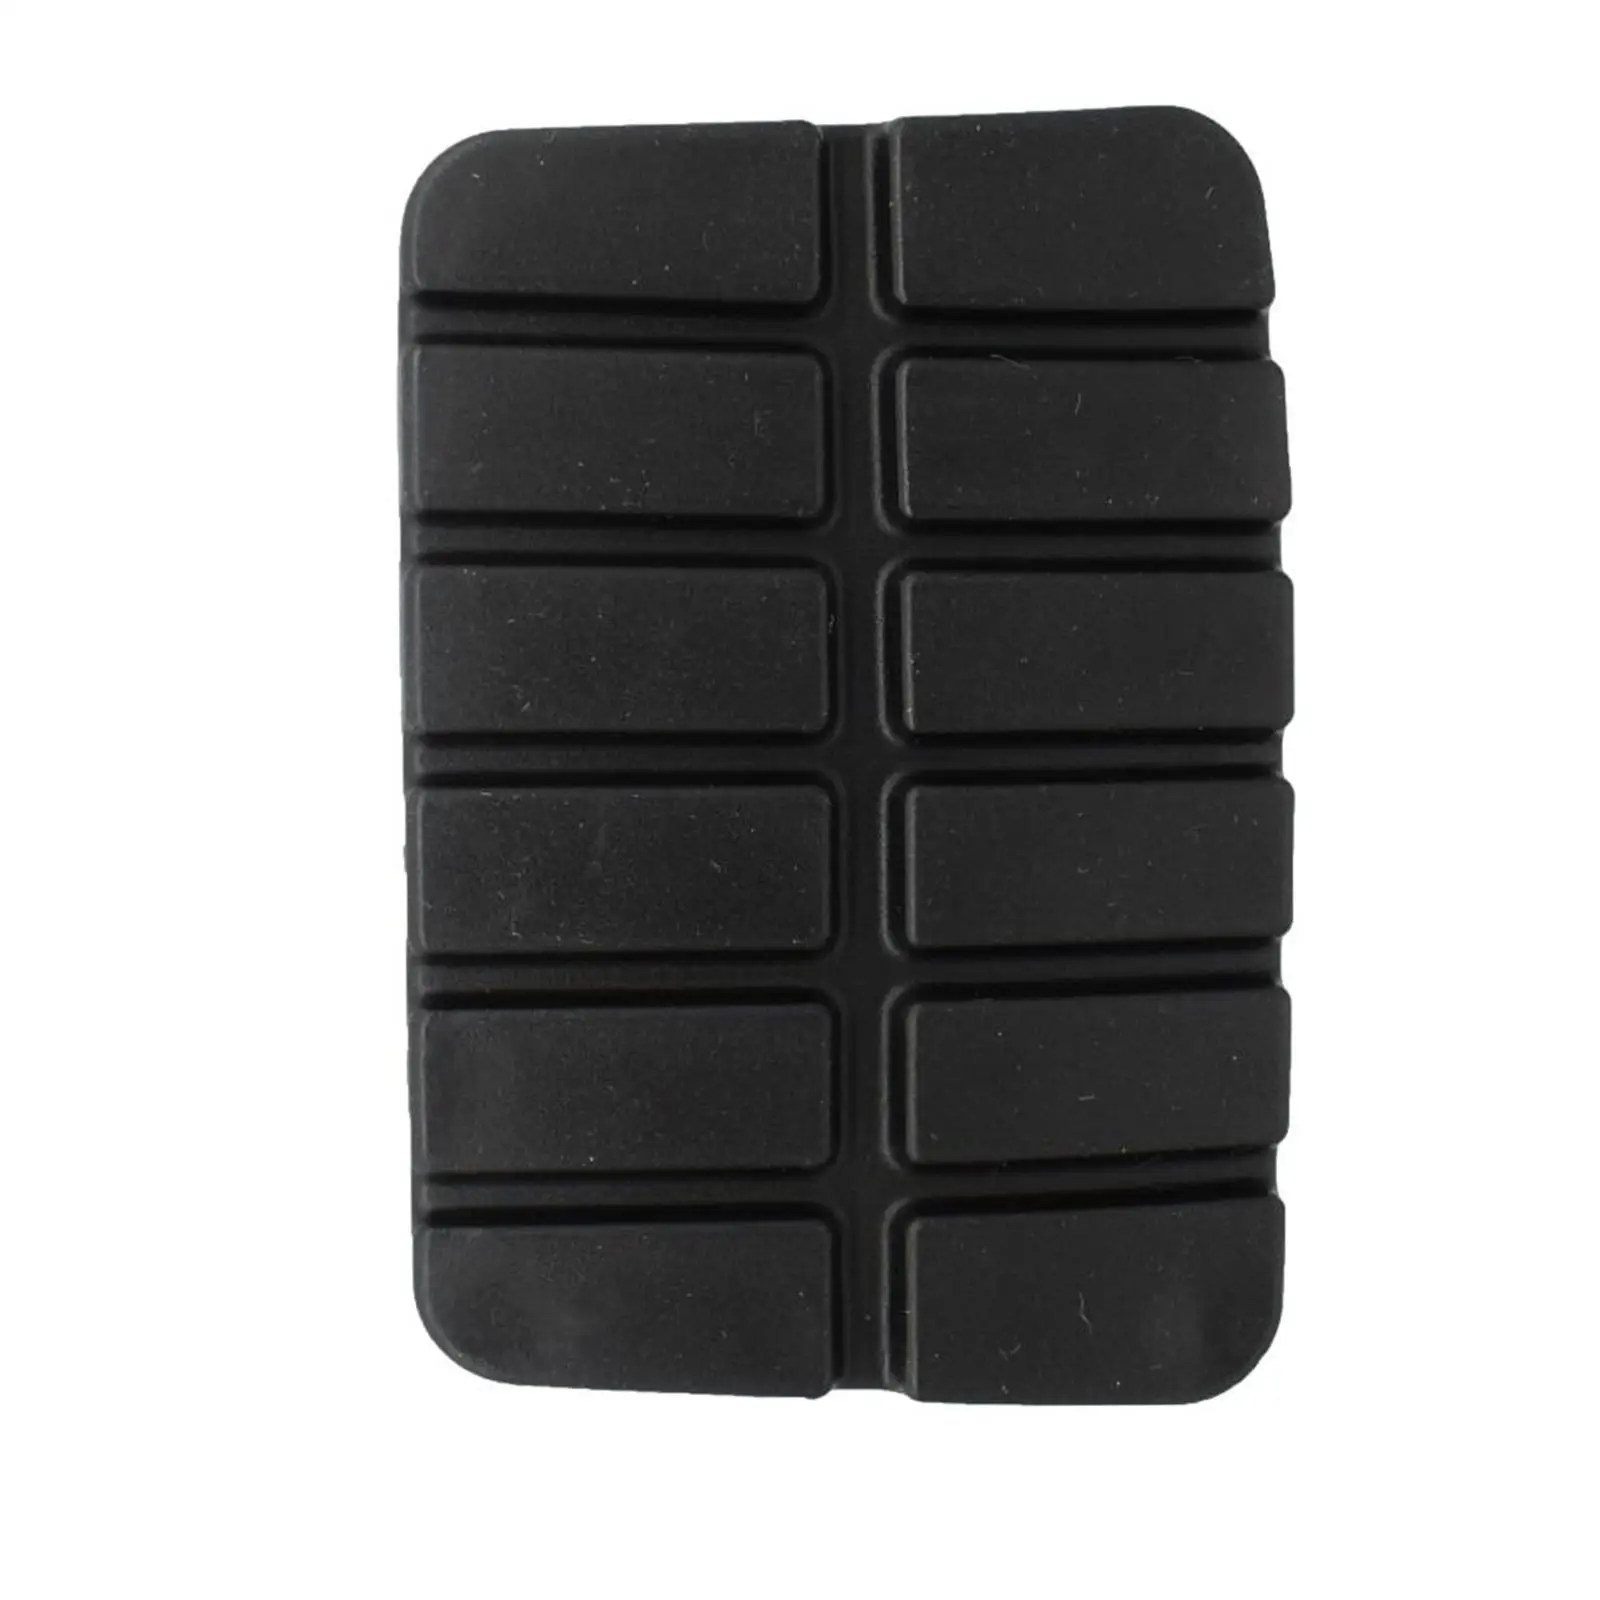 Brake Clutch Pedal Pad Replacement 49751-ni110 Car Brake Clutch Pedal Rubber Pad Cover for Nissan Navara D21 D22 1986-2006